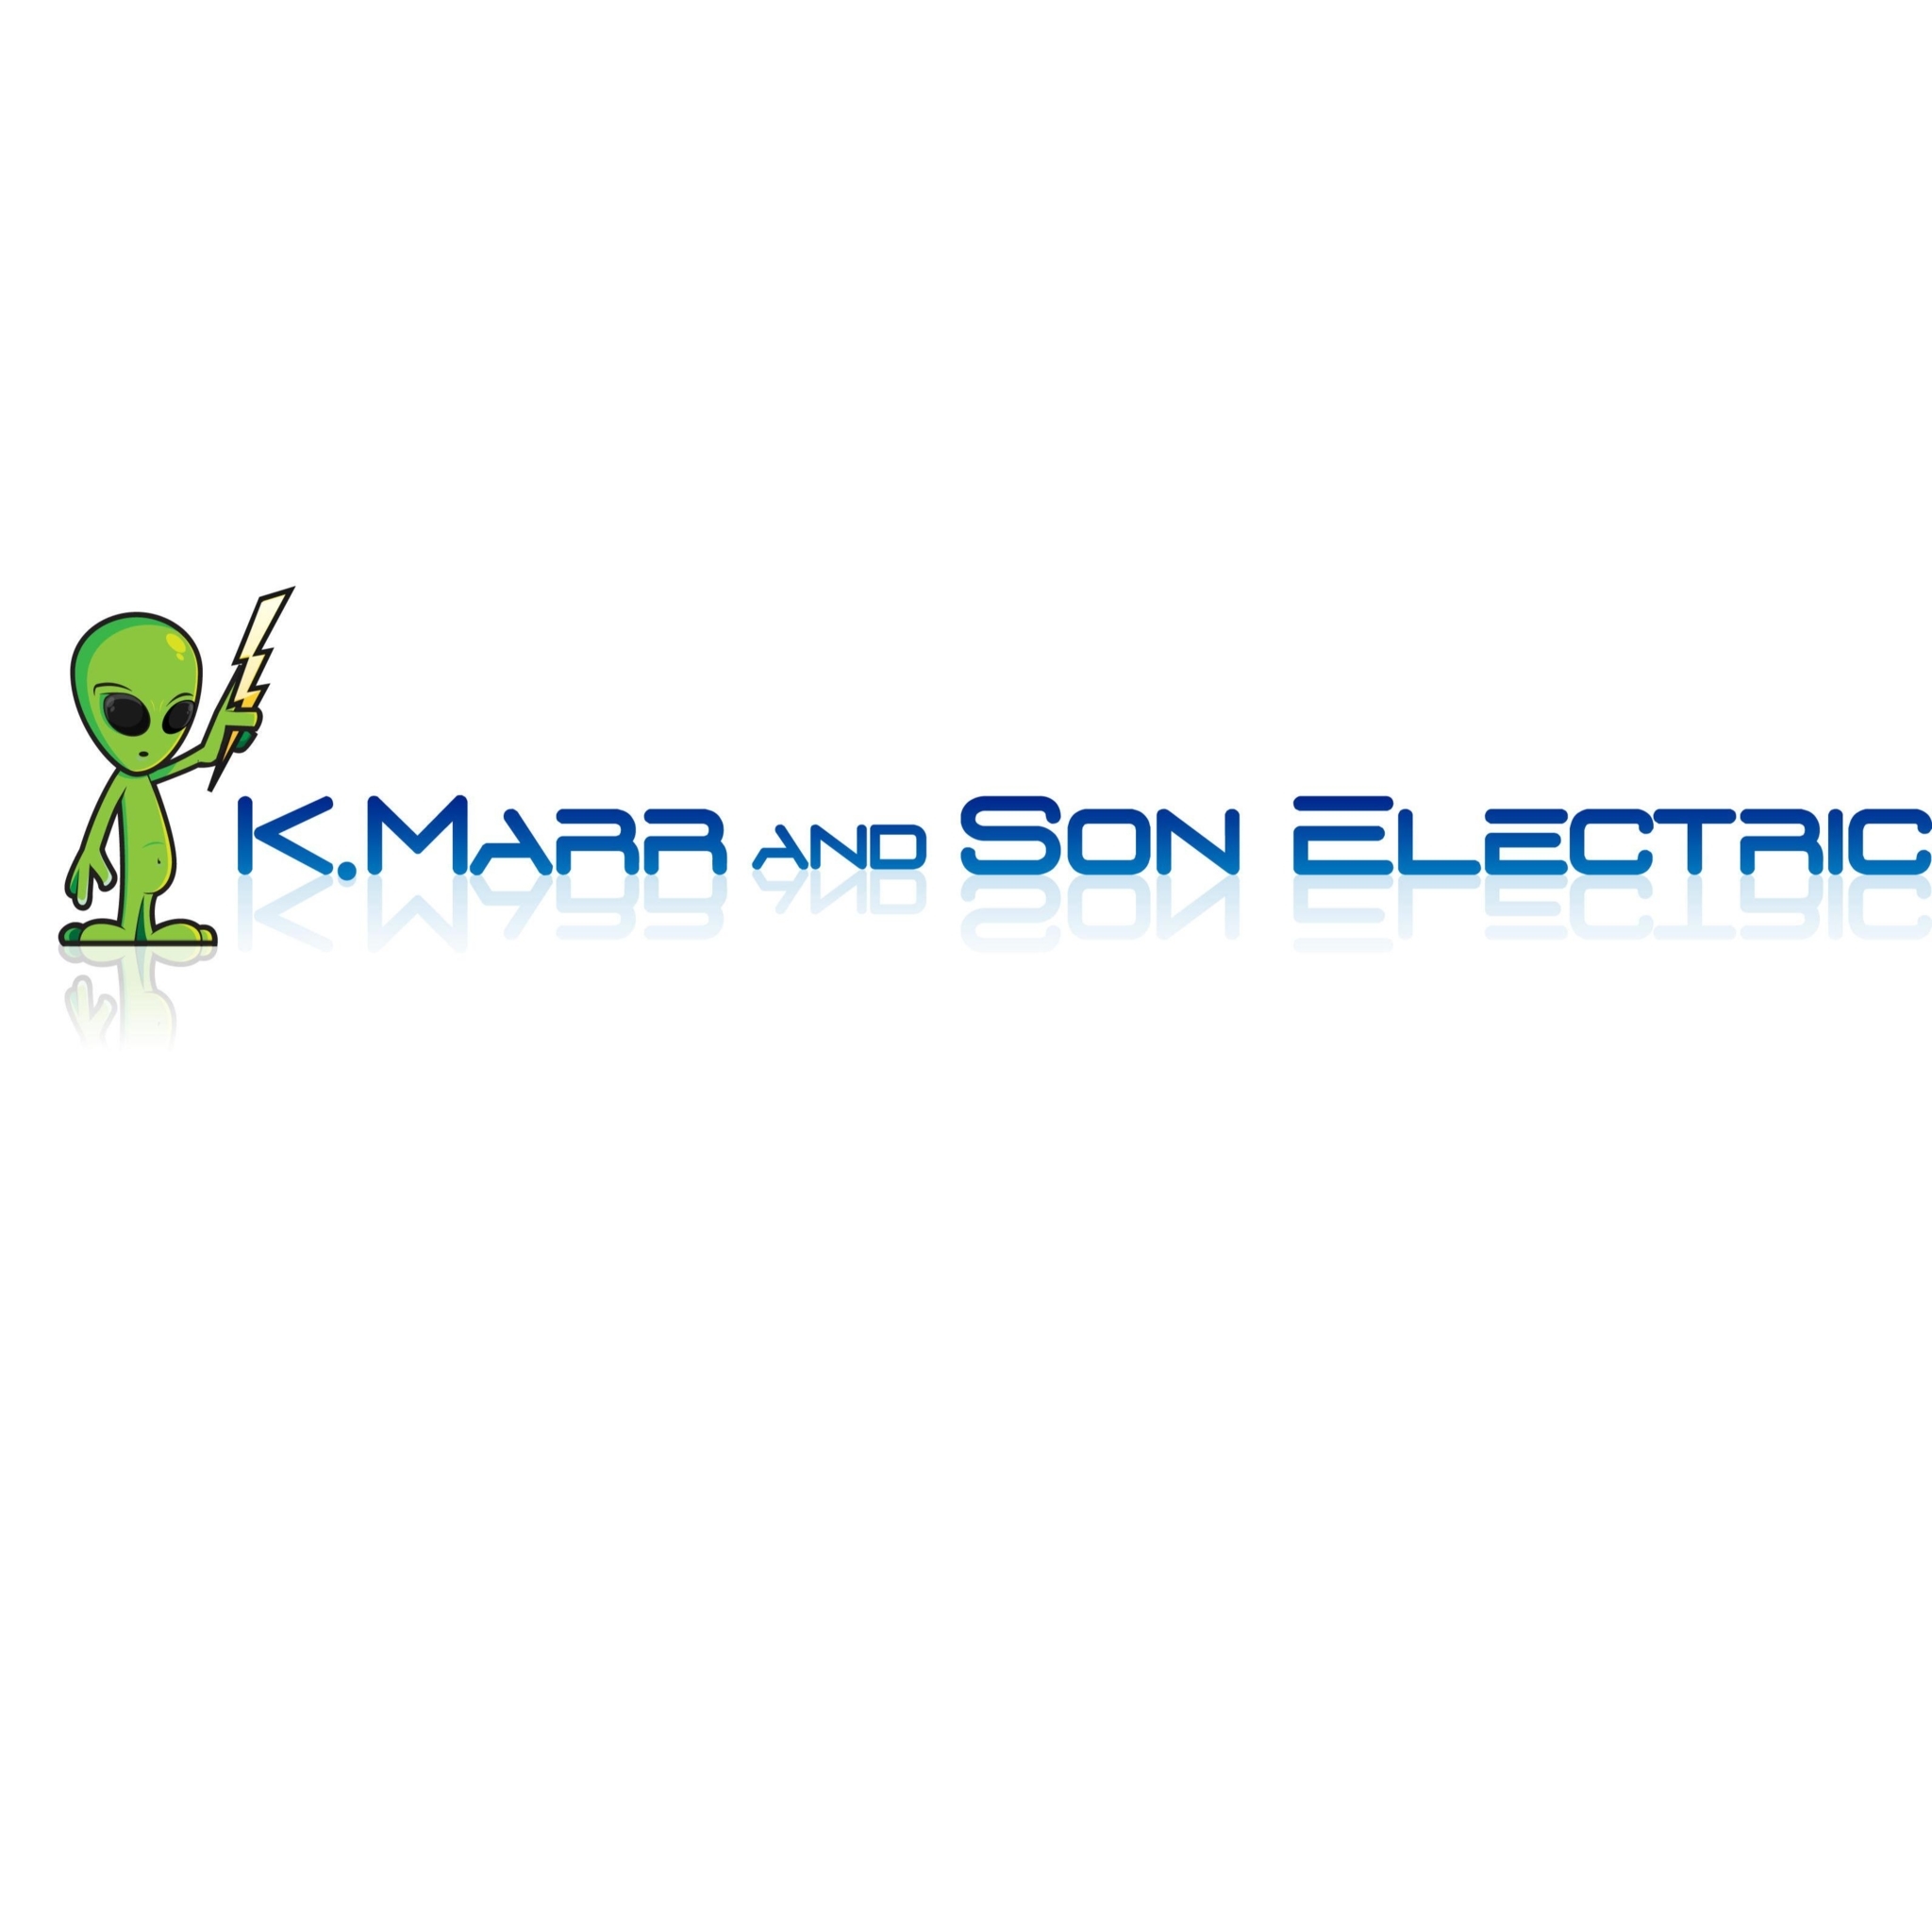 K.MARR AND SON ELECTRIC - Electricians & Electrical Contractors